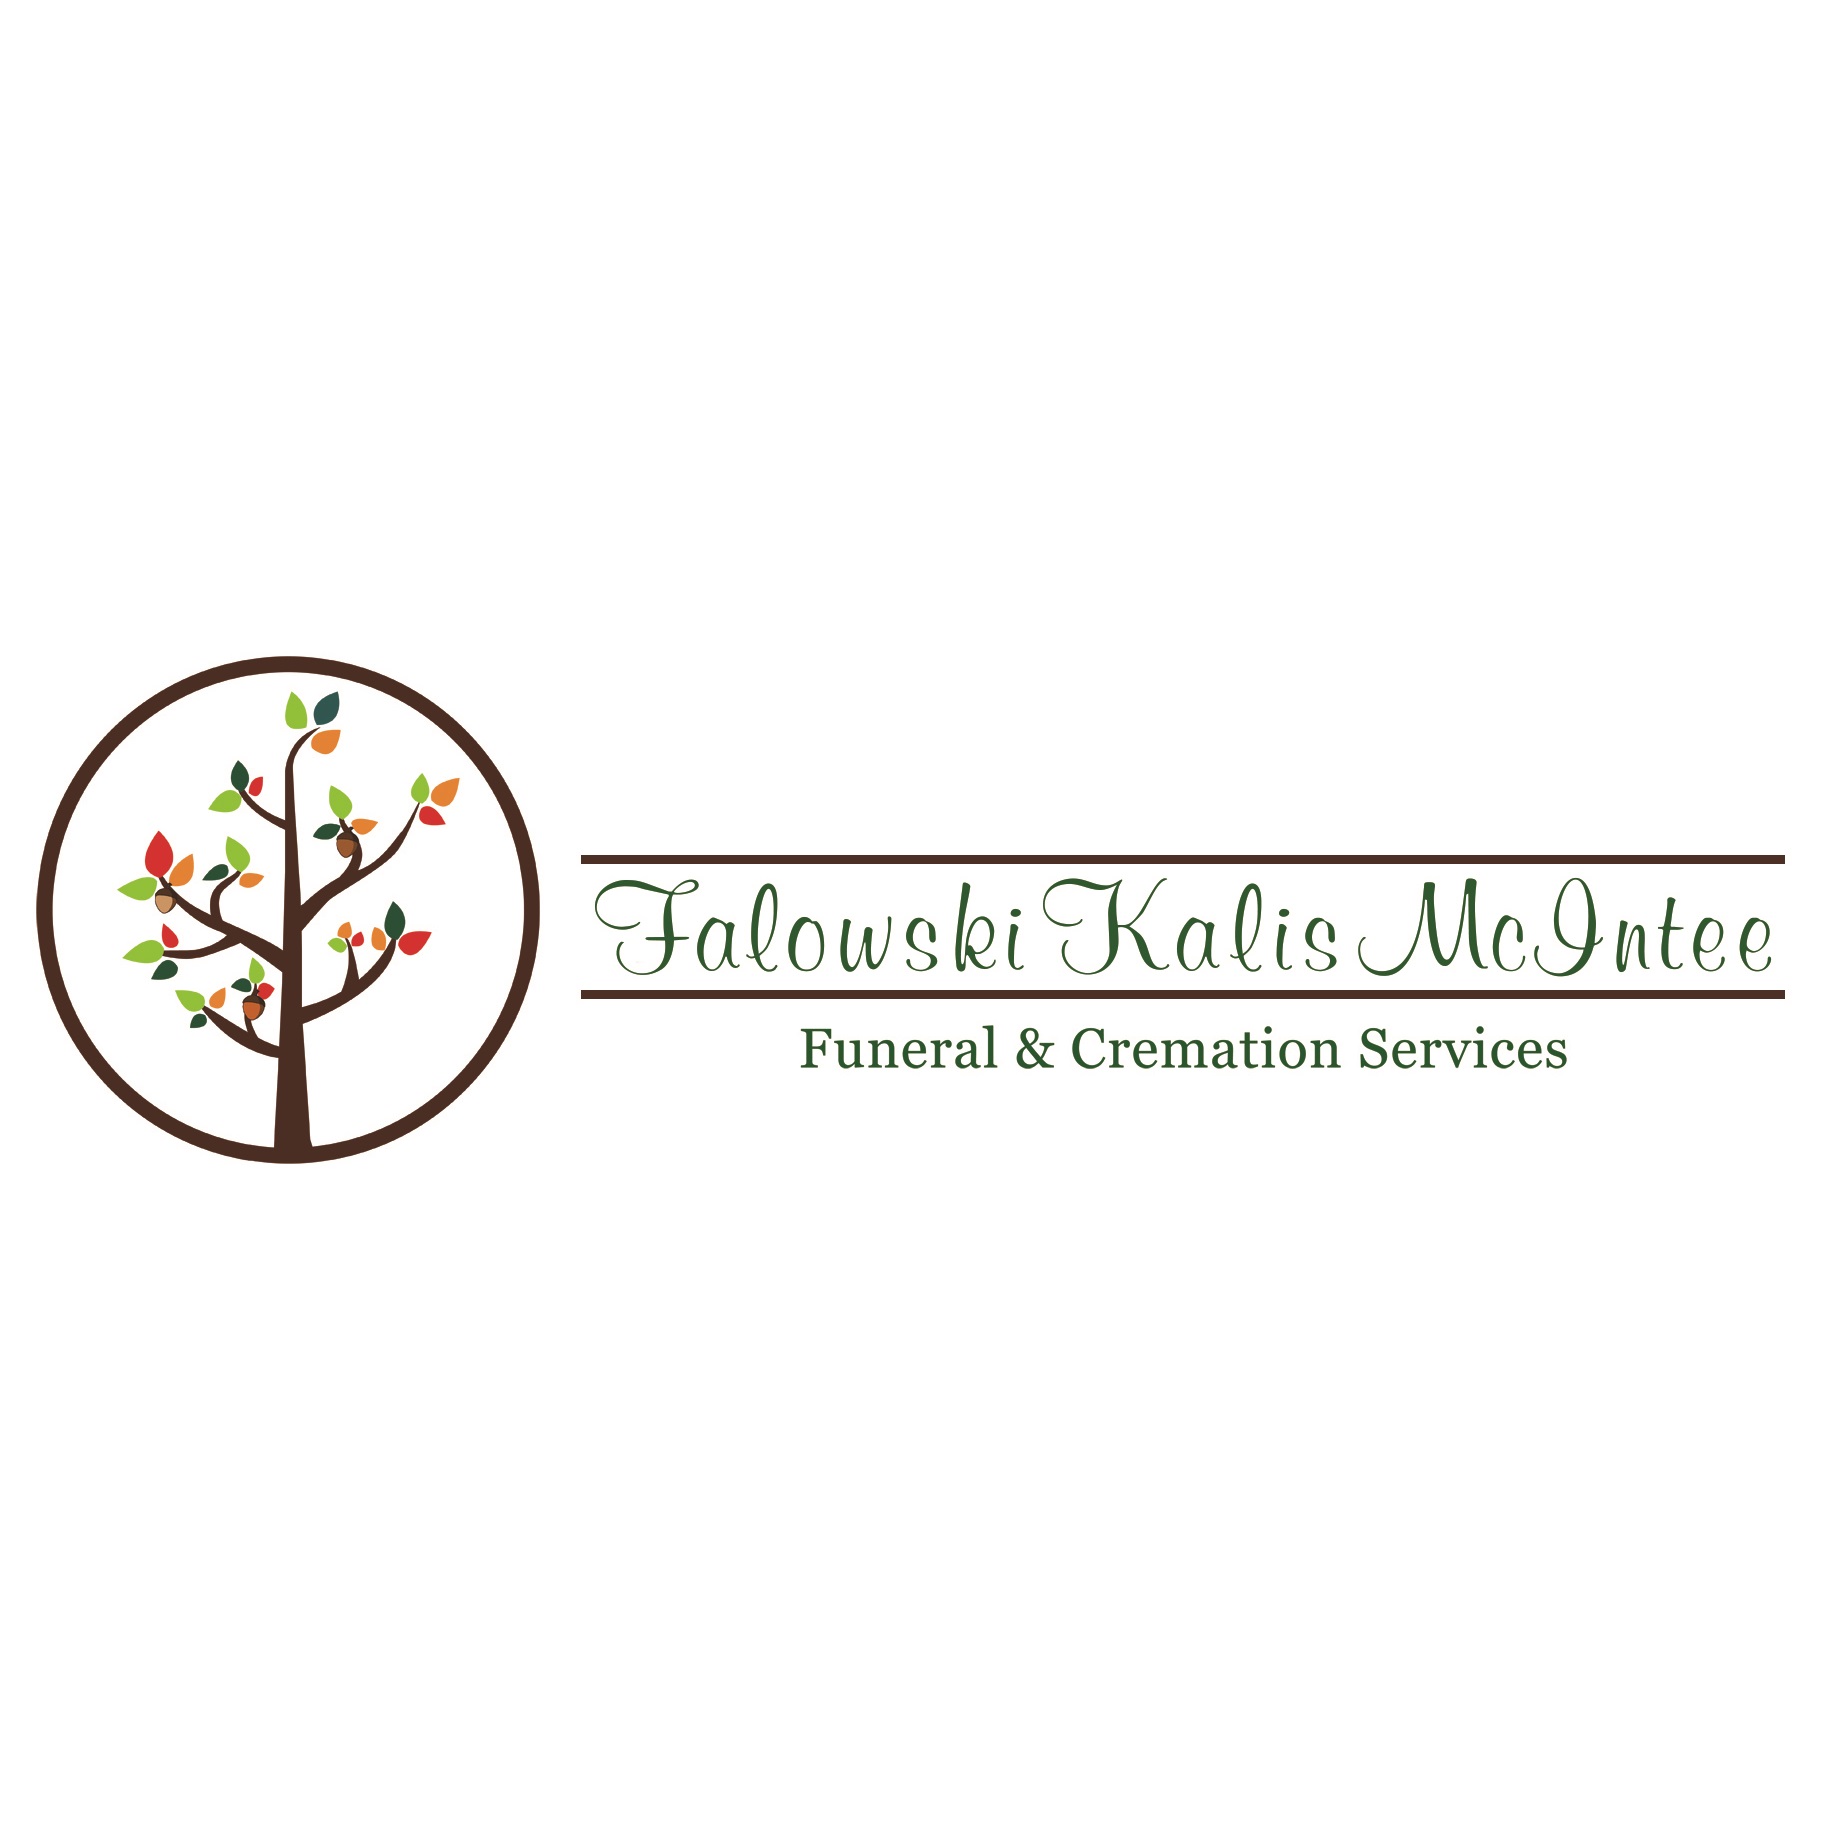 falowski kalis mcintee funeral & cremation services | funeral directors in fort lauderdale